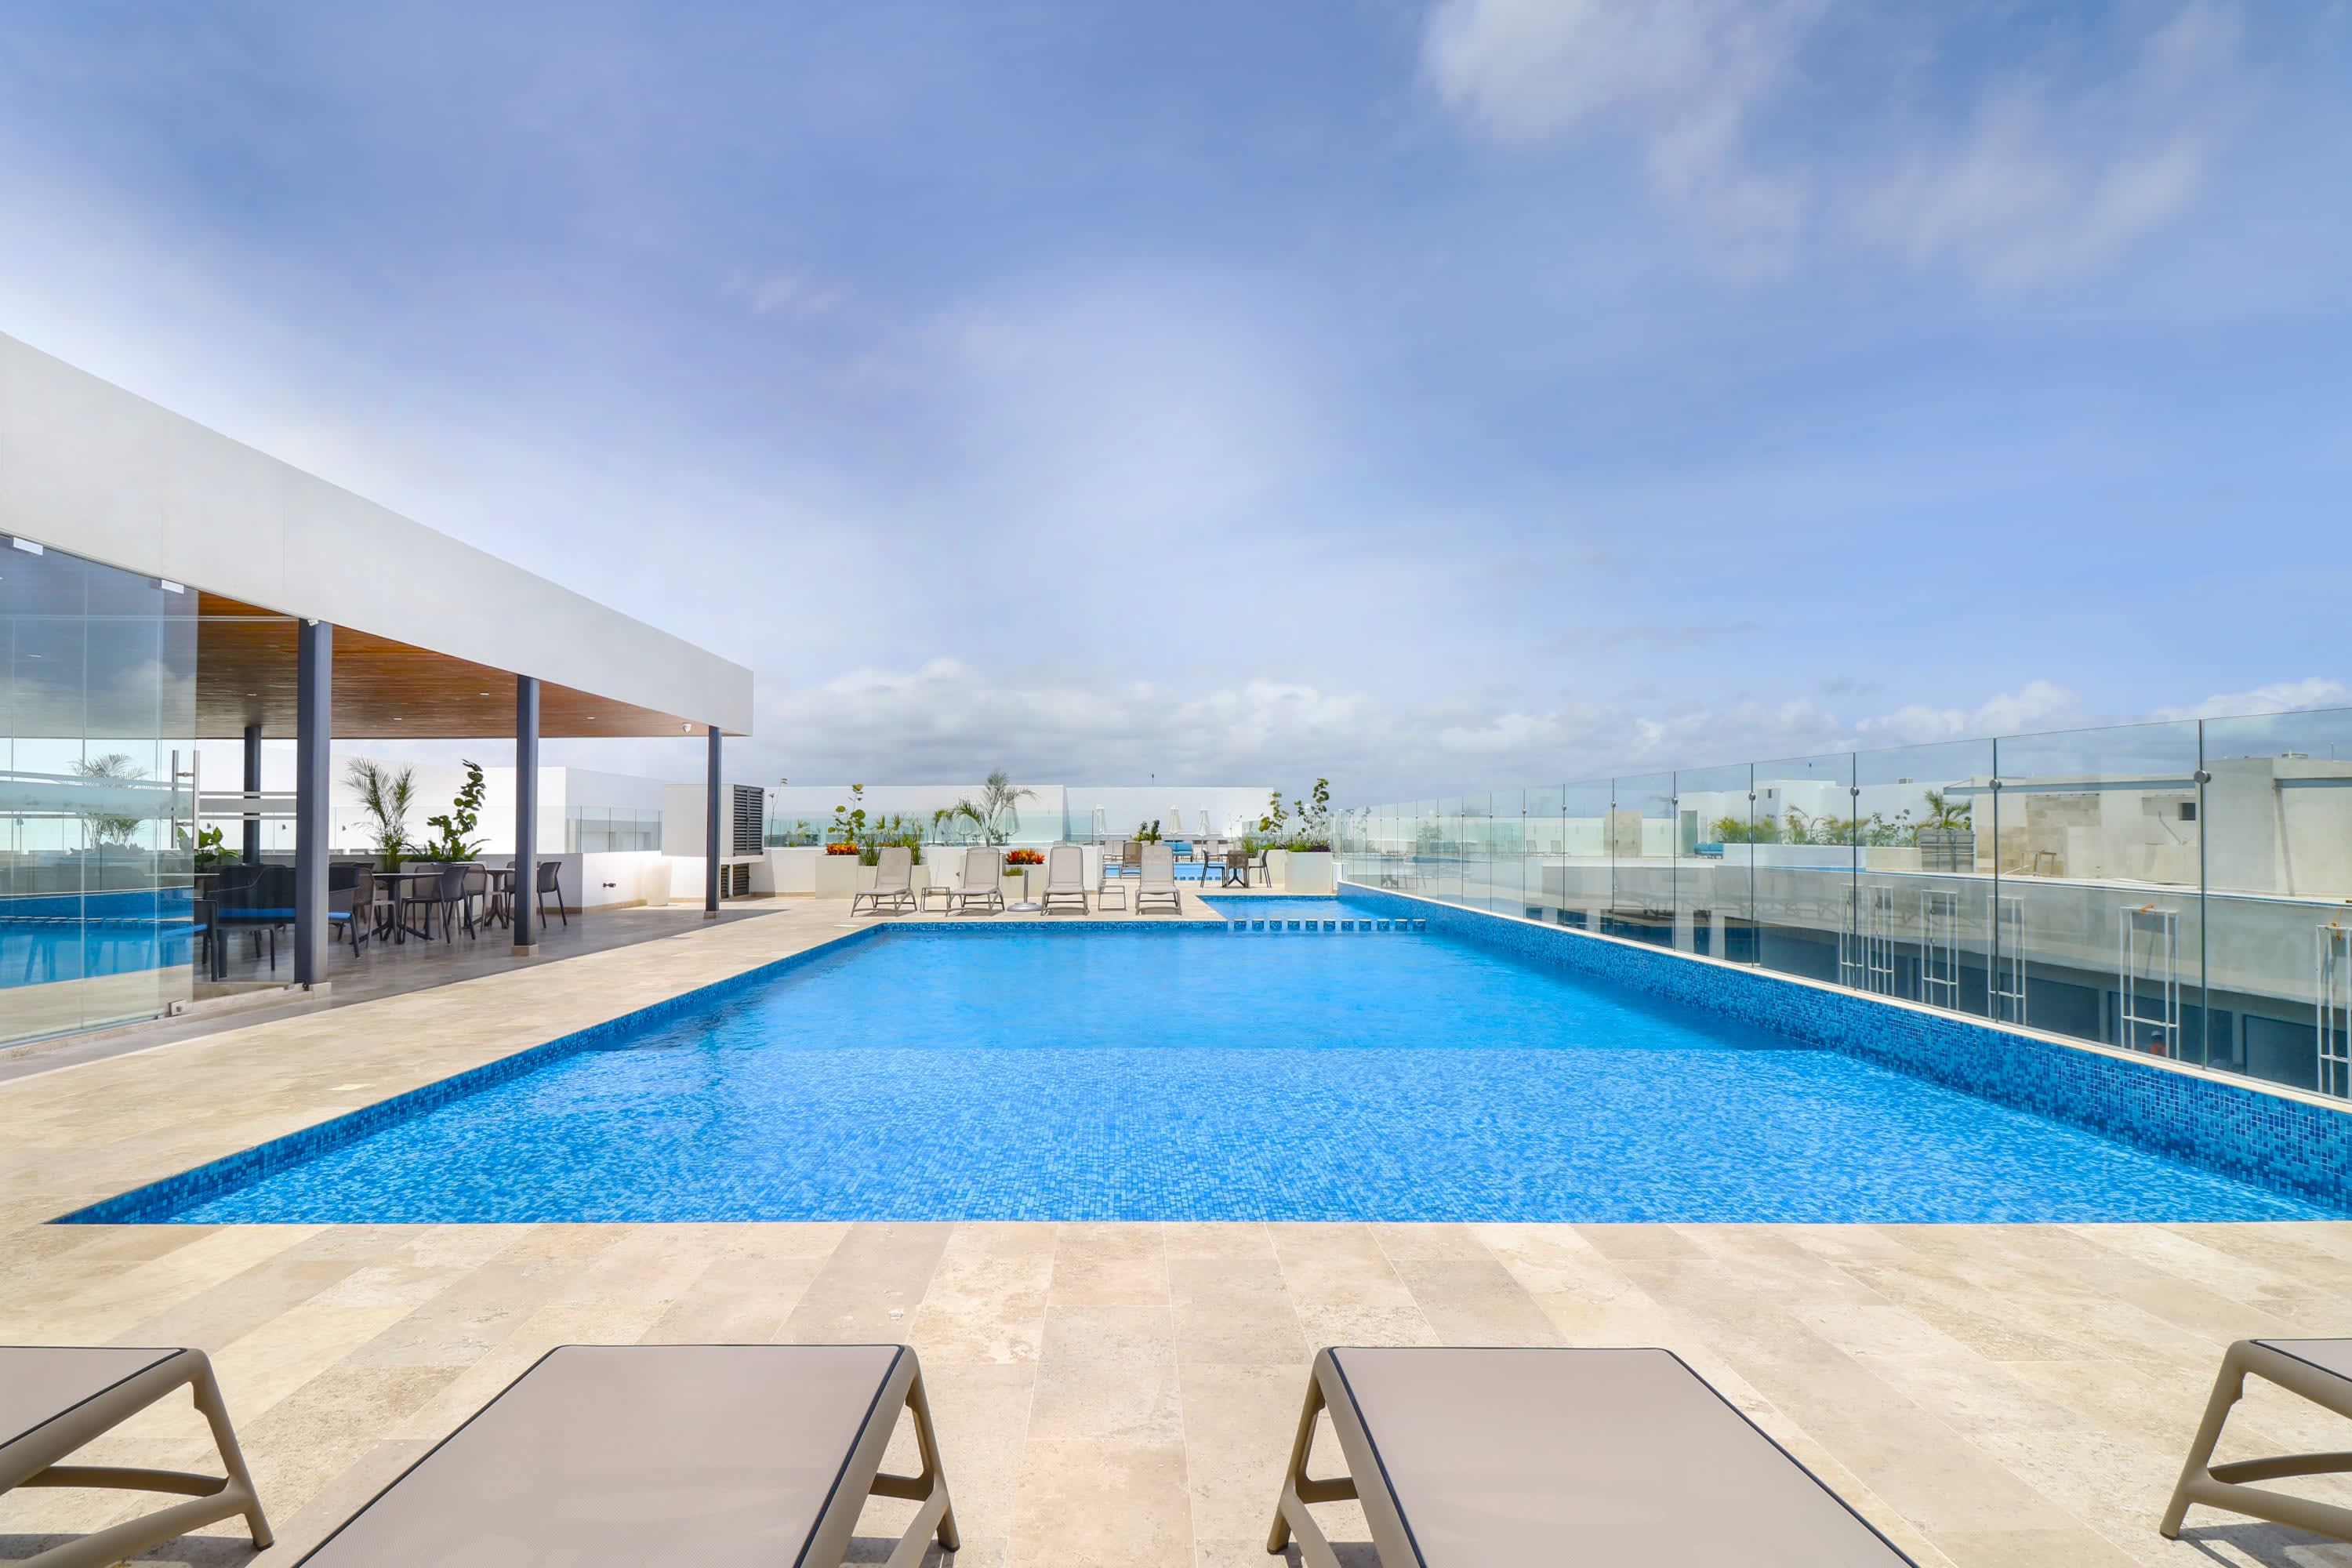 Property Image 1 - 1 BR #1 location! Condo IPANA. Brand new W/ 3 Rooftop Pools, Gym and Rooftop bar with Ocean View.!!!